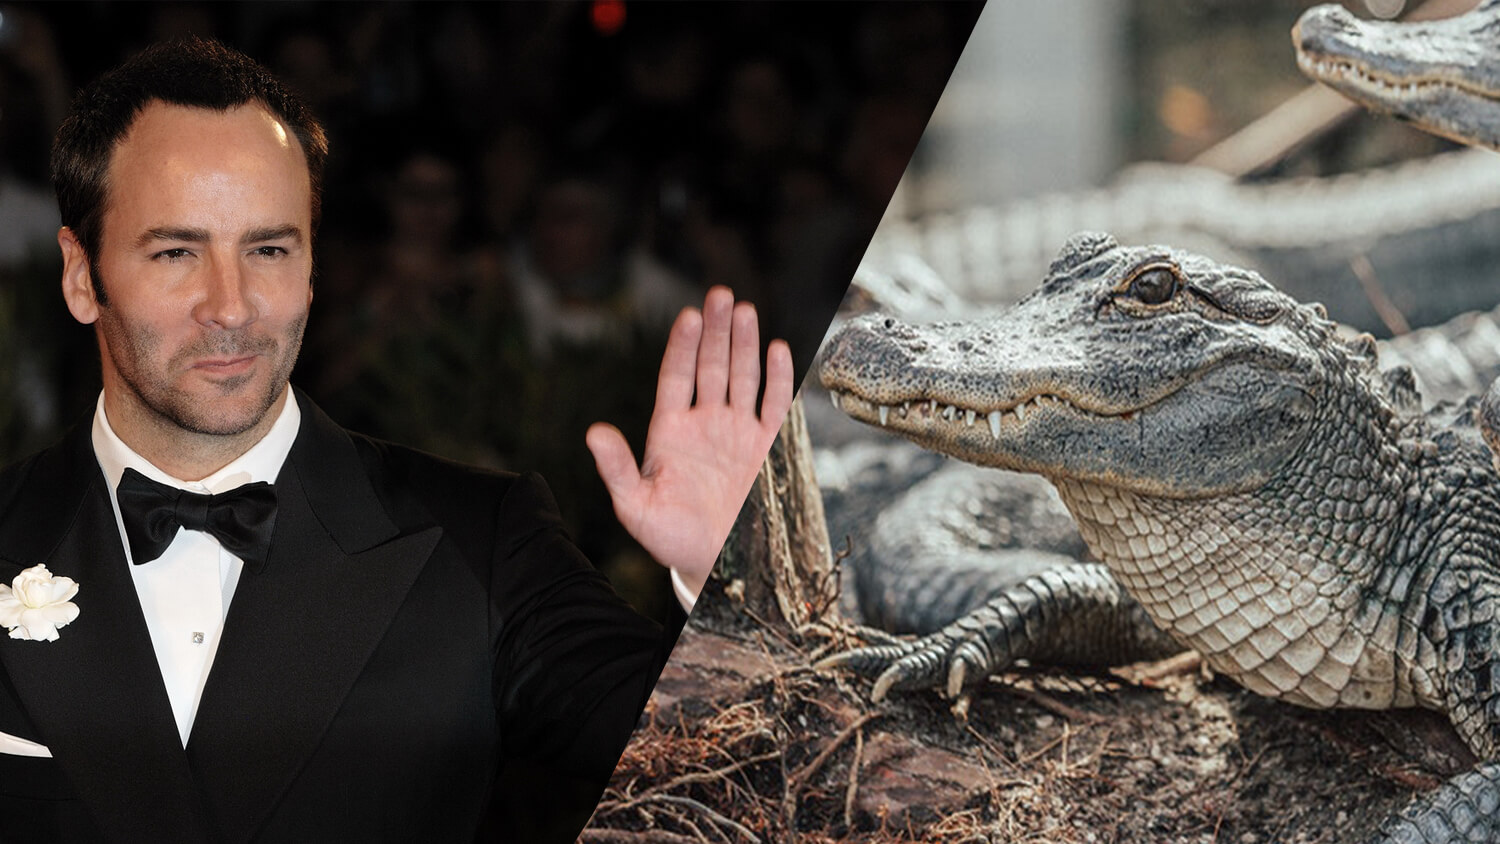 Vegan Designer Tom Ford Launches Cruelty-Free Crocodile Leather at